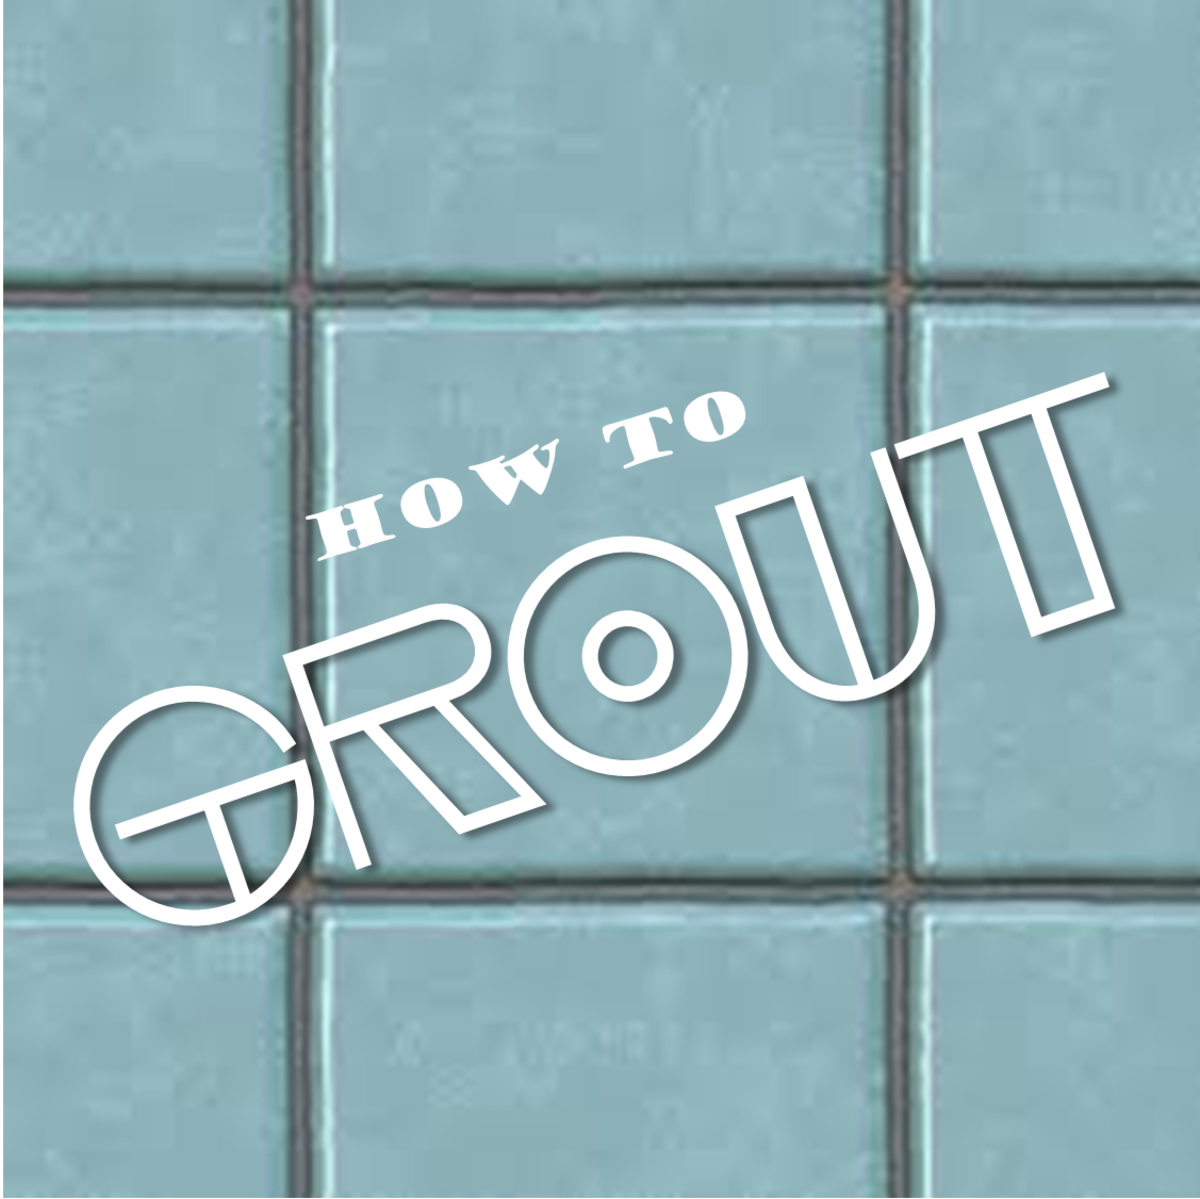 ceramic-tile-grout_learn_how-to-grout_successfully